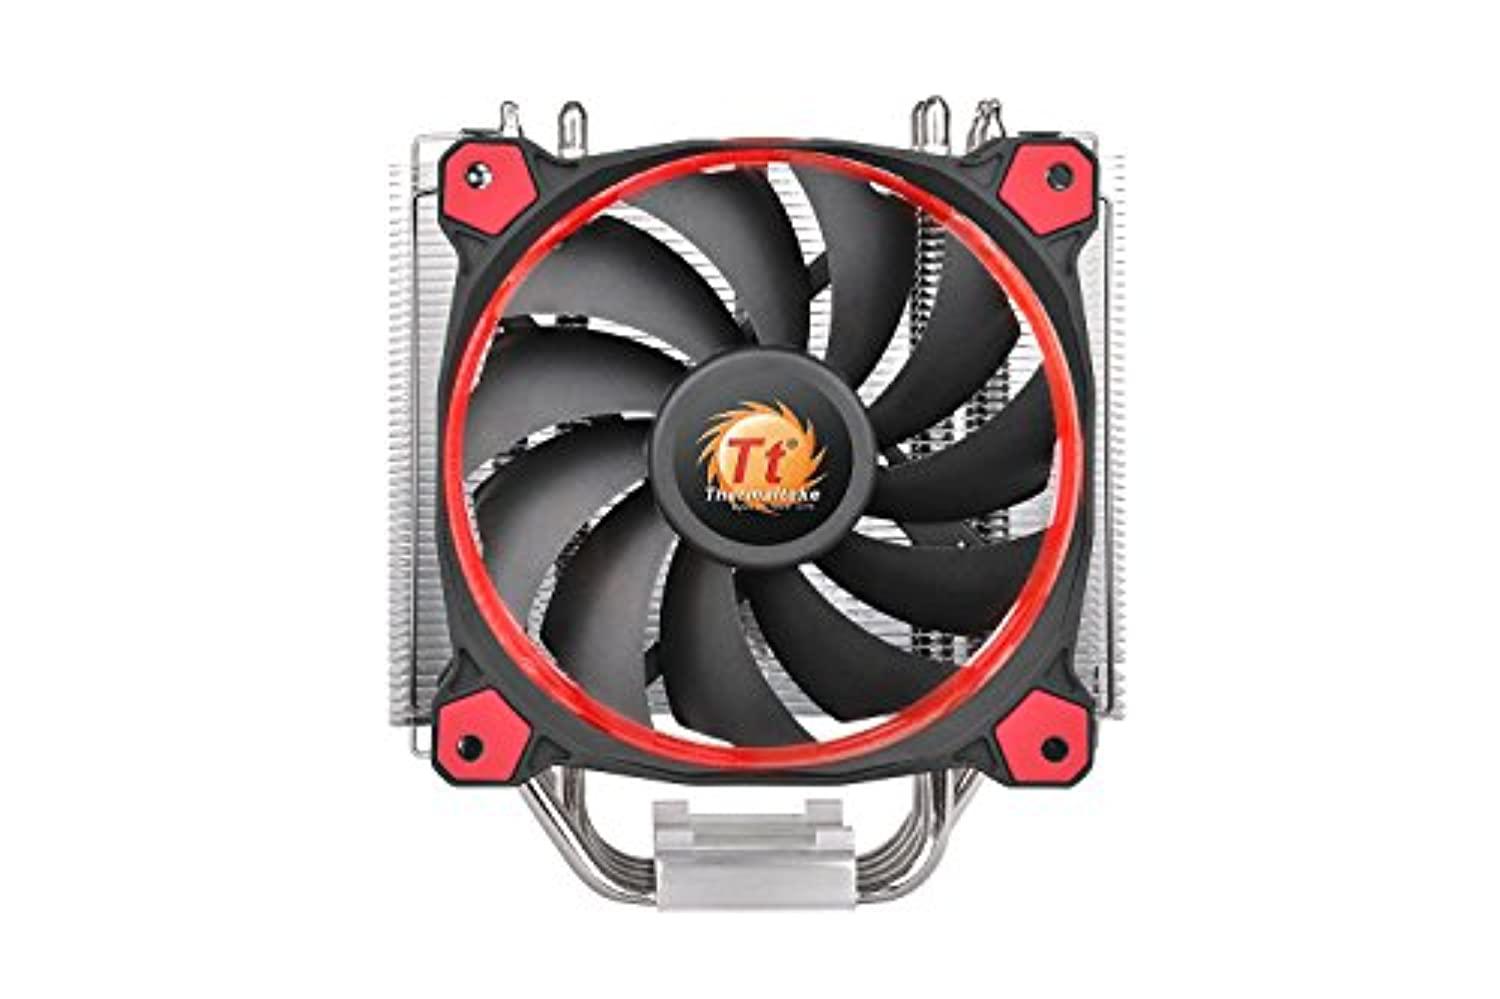 thermaltake riing silent 150w intel/amd 120mm high airflow led fan cpu cooler, red